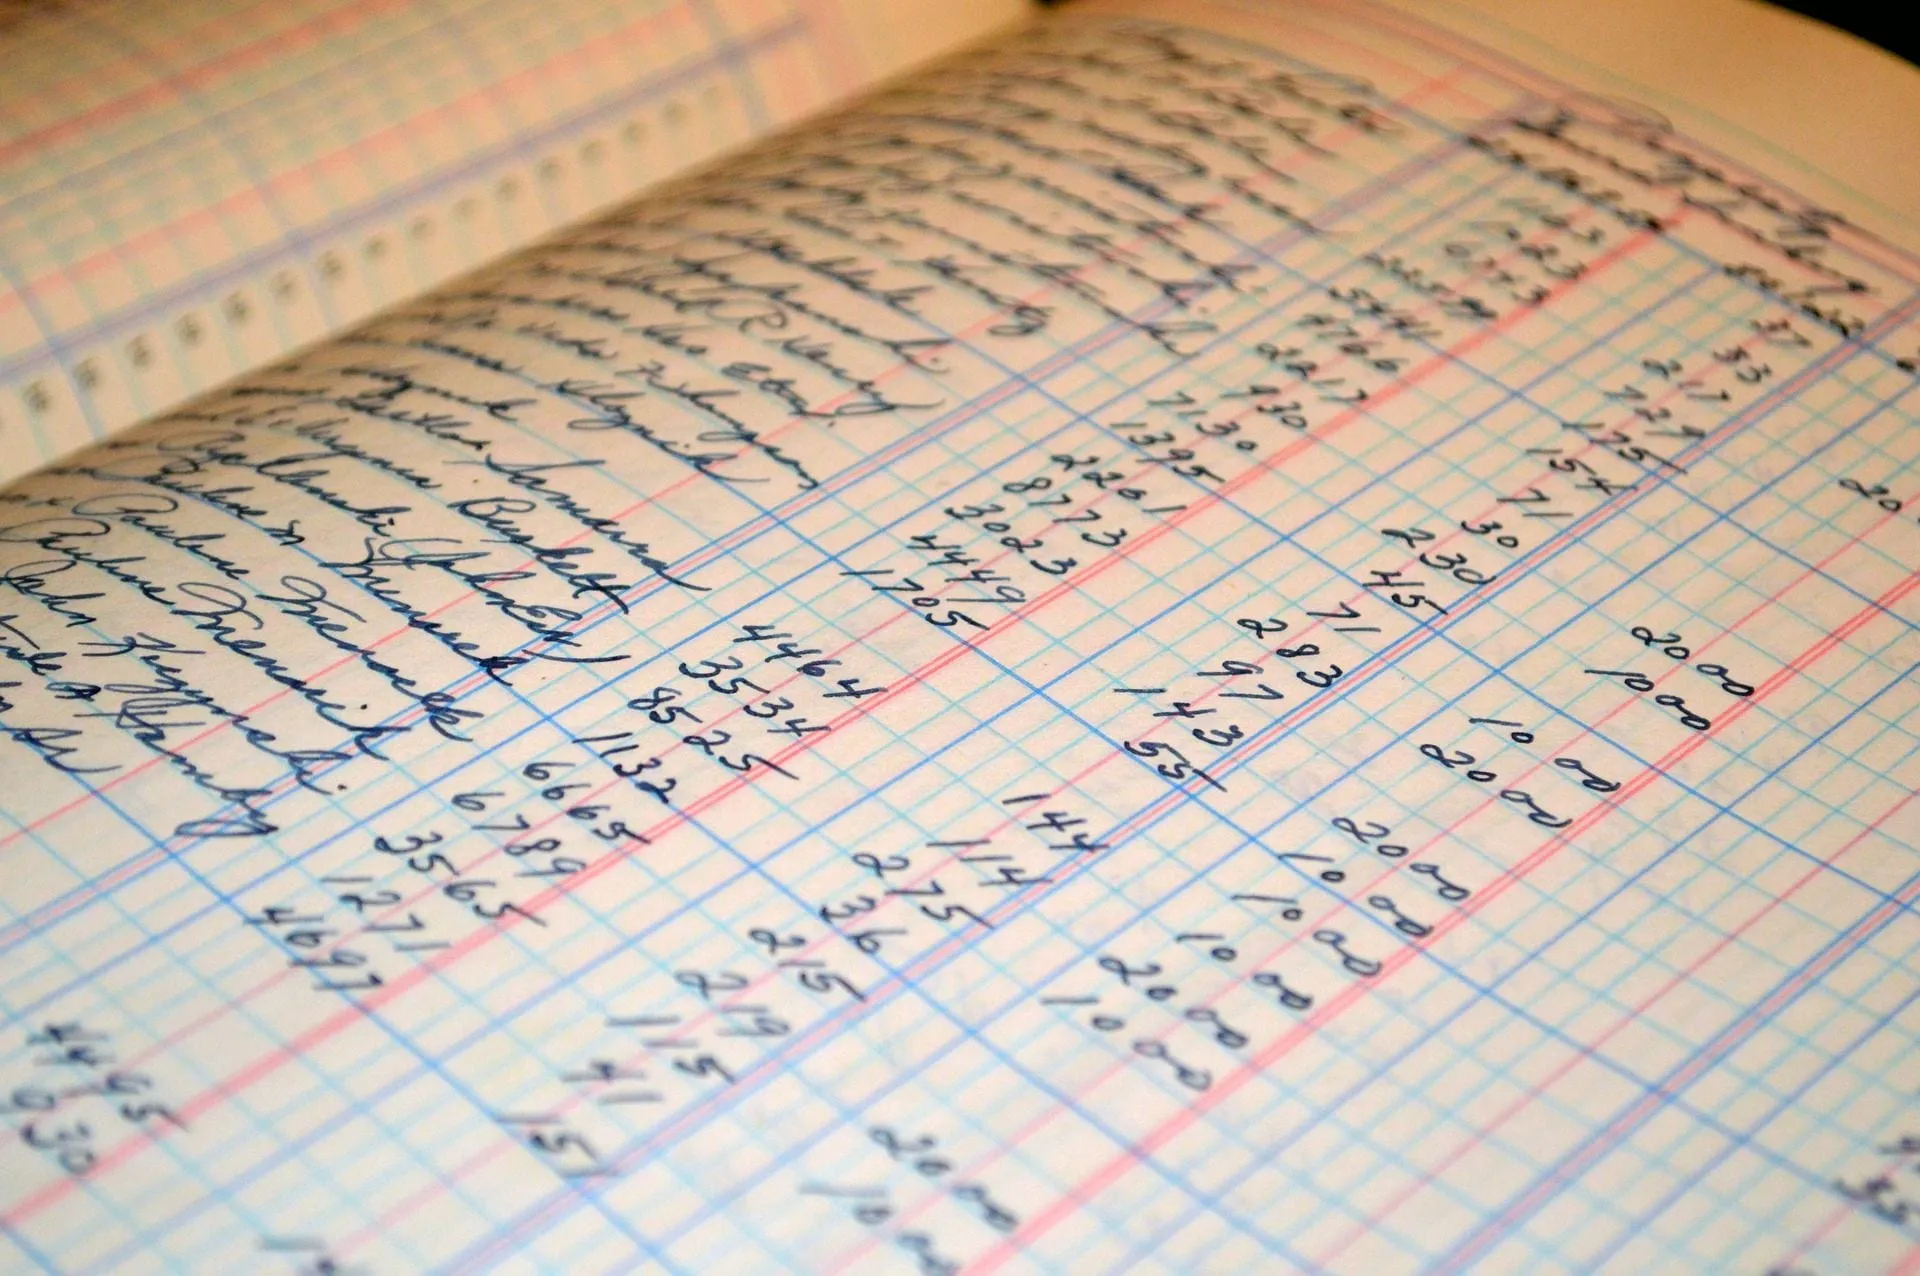 History of Spreadsheets: A Typical Ledger